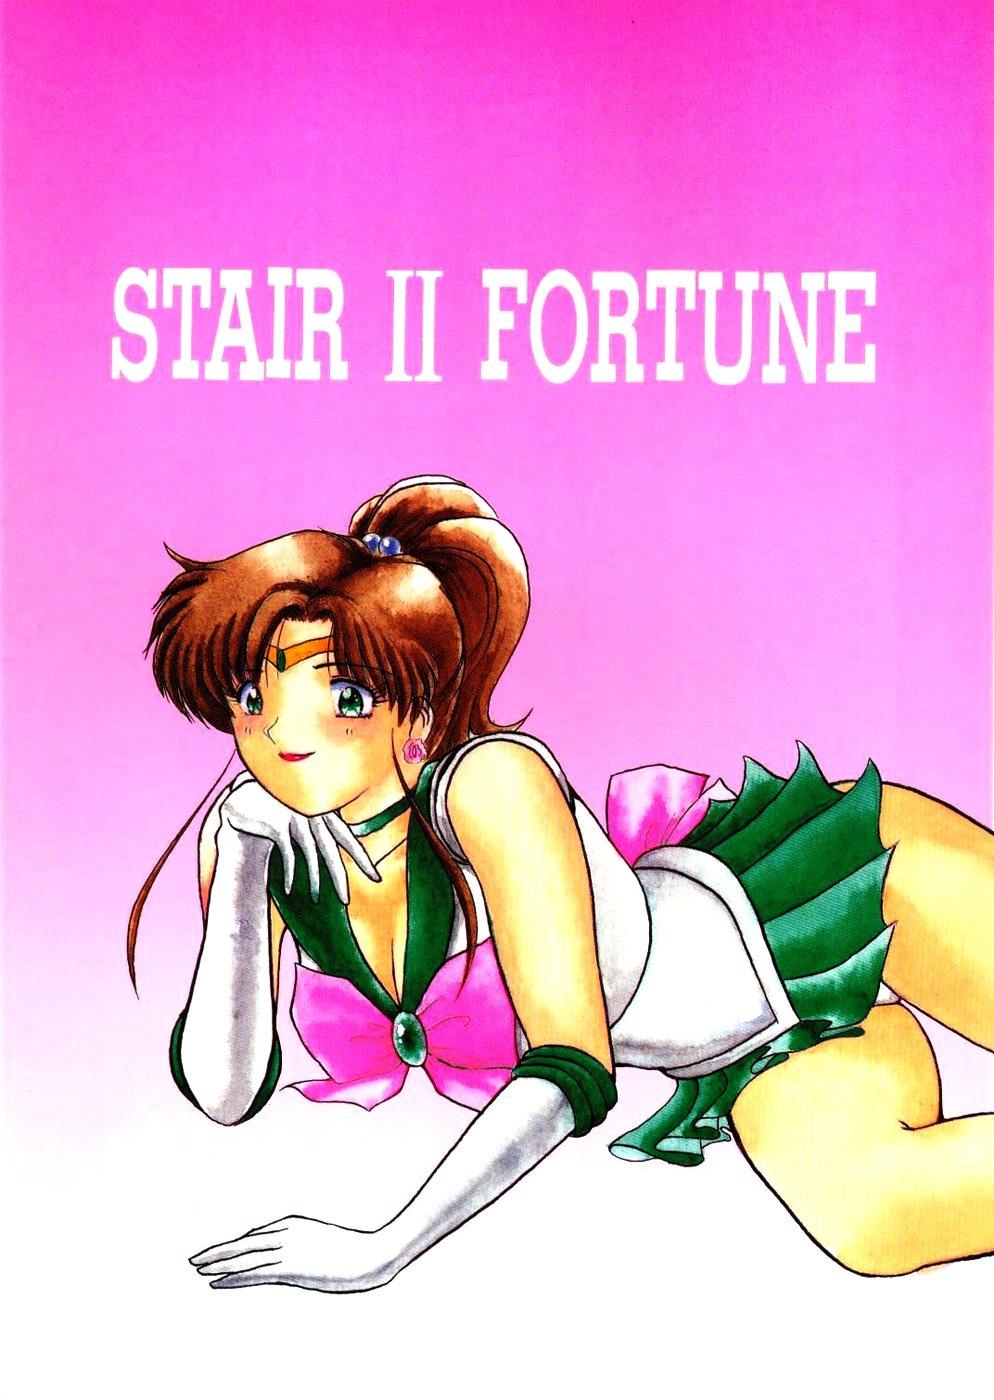 Smalltits STAIR II FORTUNE - Sailor moon Gay Dudes - Picture 1